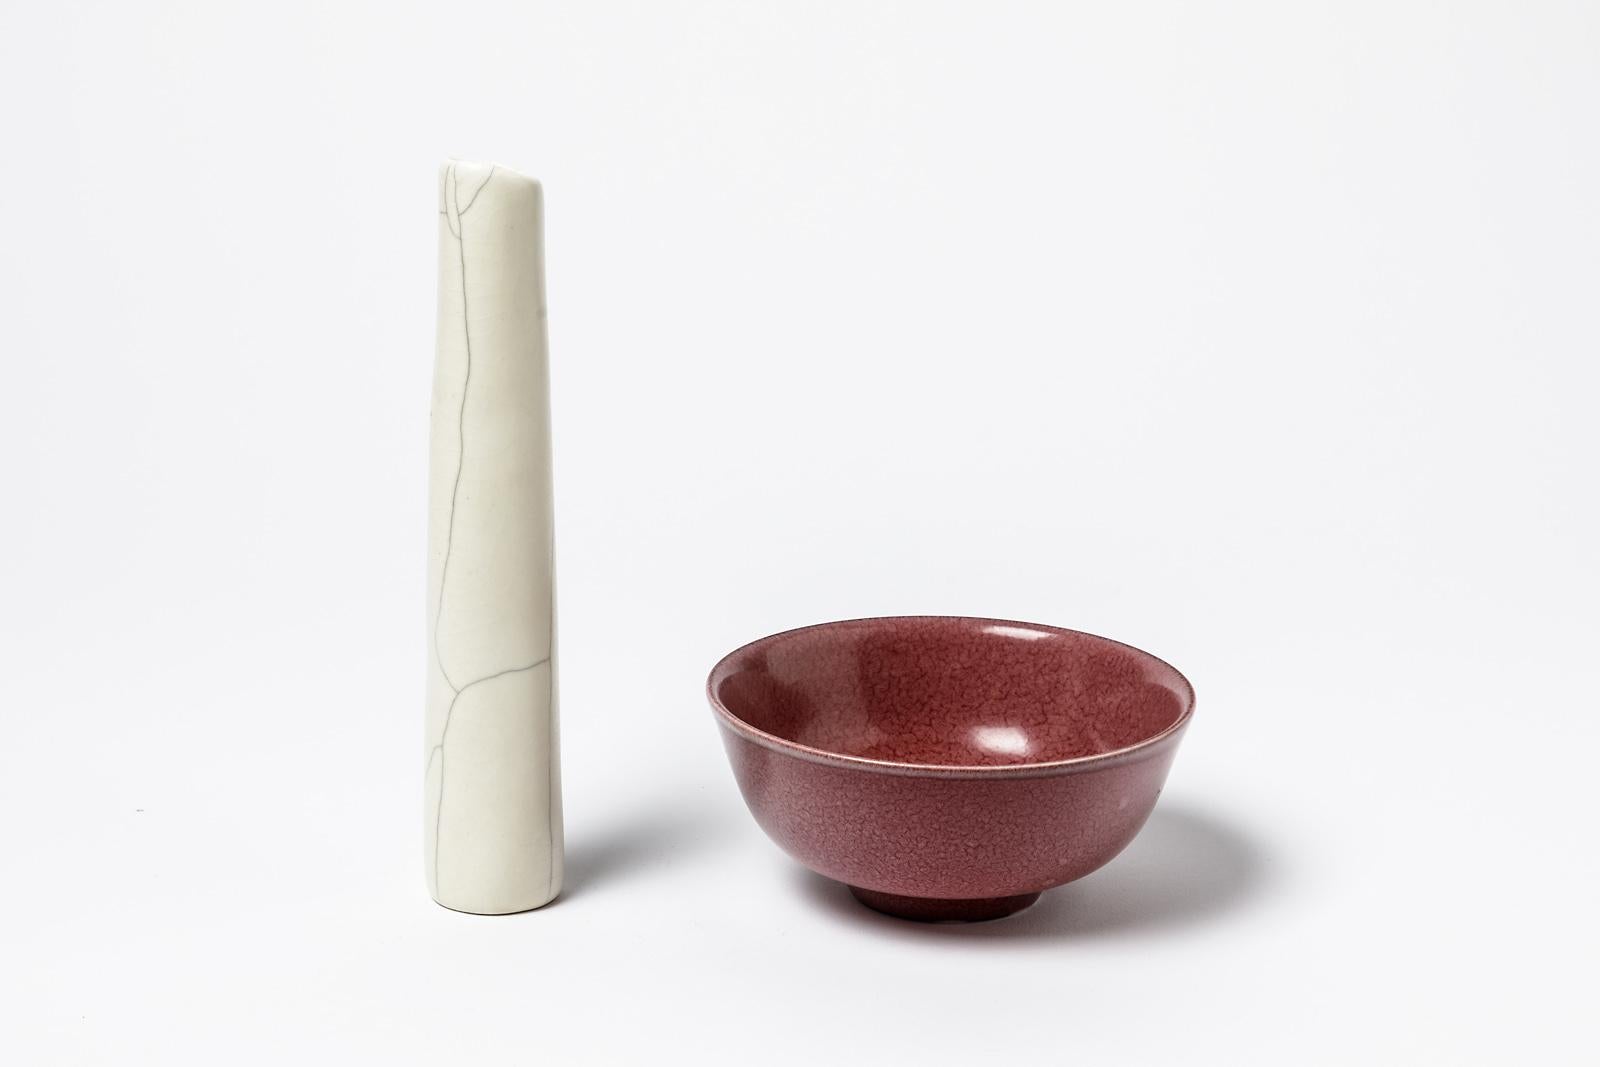 French Pink or Red Glazed Porcelain Ceramic Bowl or Cup by Marc Uzan, circa 2010 For Sale